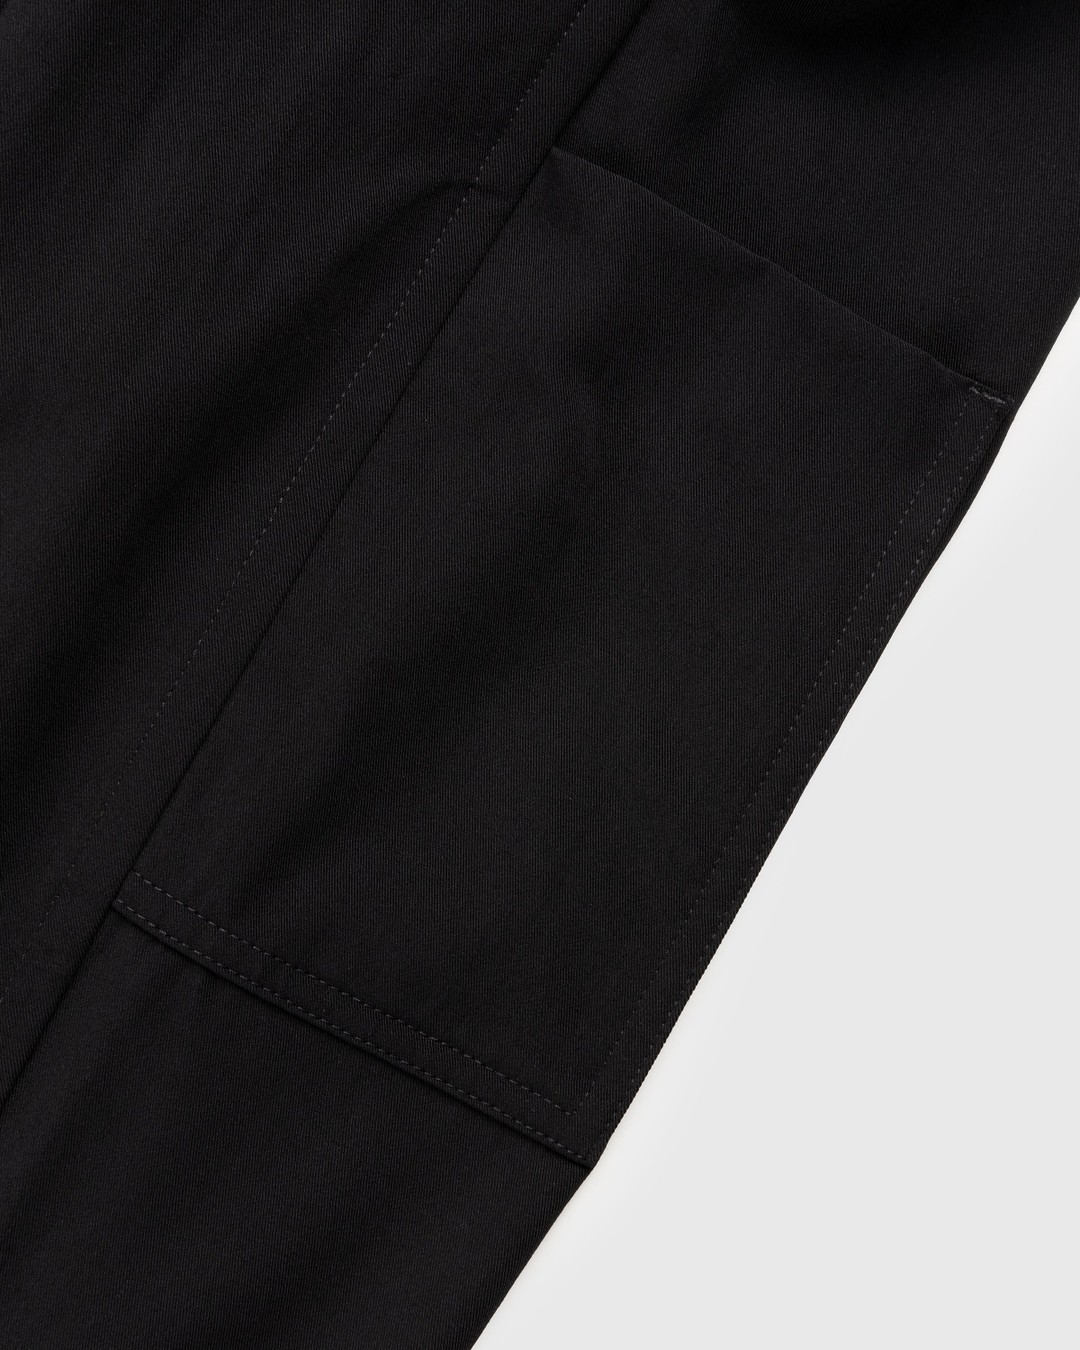 Diomene by Damir Doma – Classic pants Meteorite - Trousers - Black - Image 3